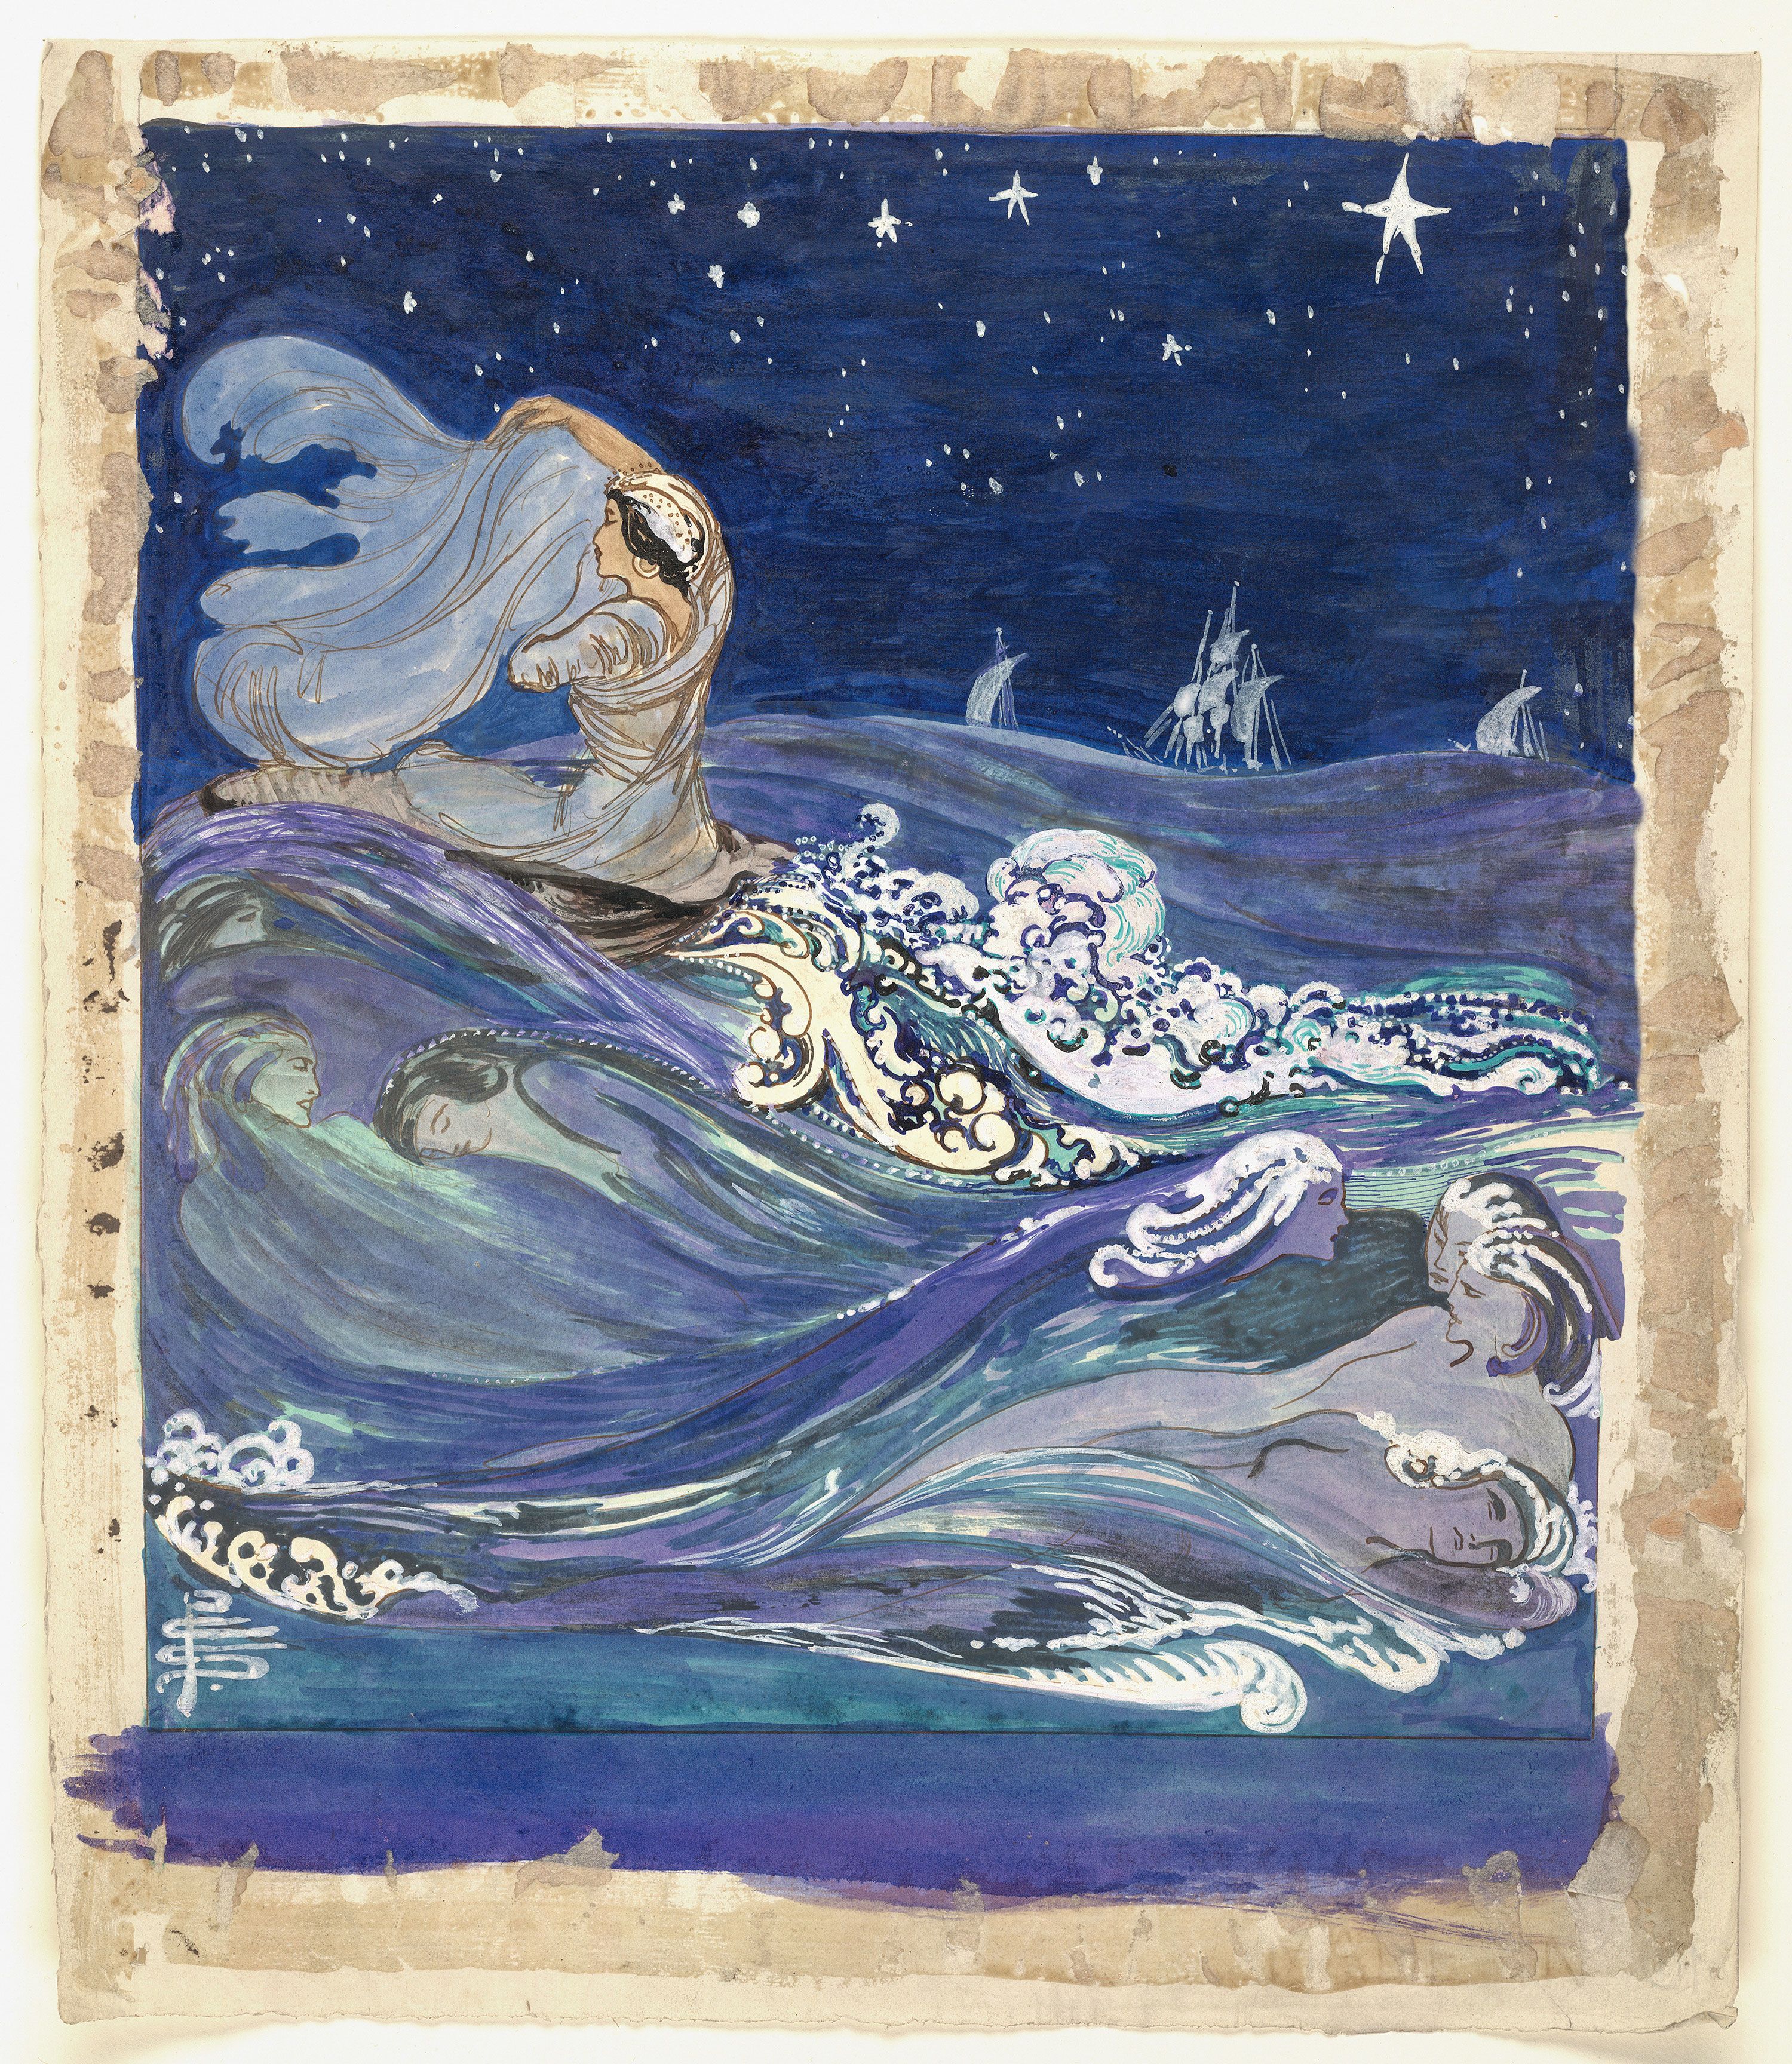 Sea Creatures by Pamela Colman Smith, painted in 1907. The artist brought her flair to the tarot cards she designed with Arthur Waite.